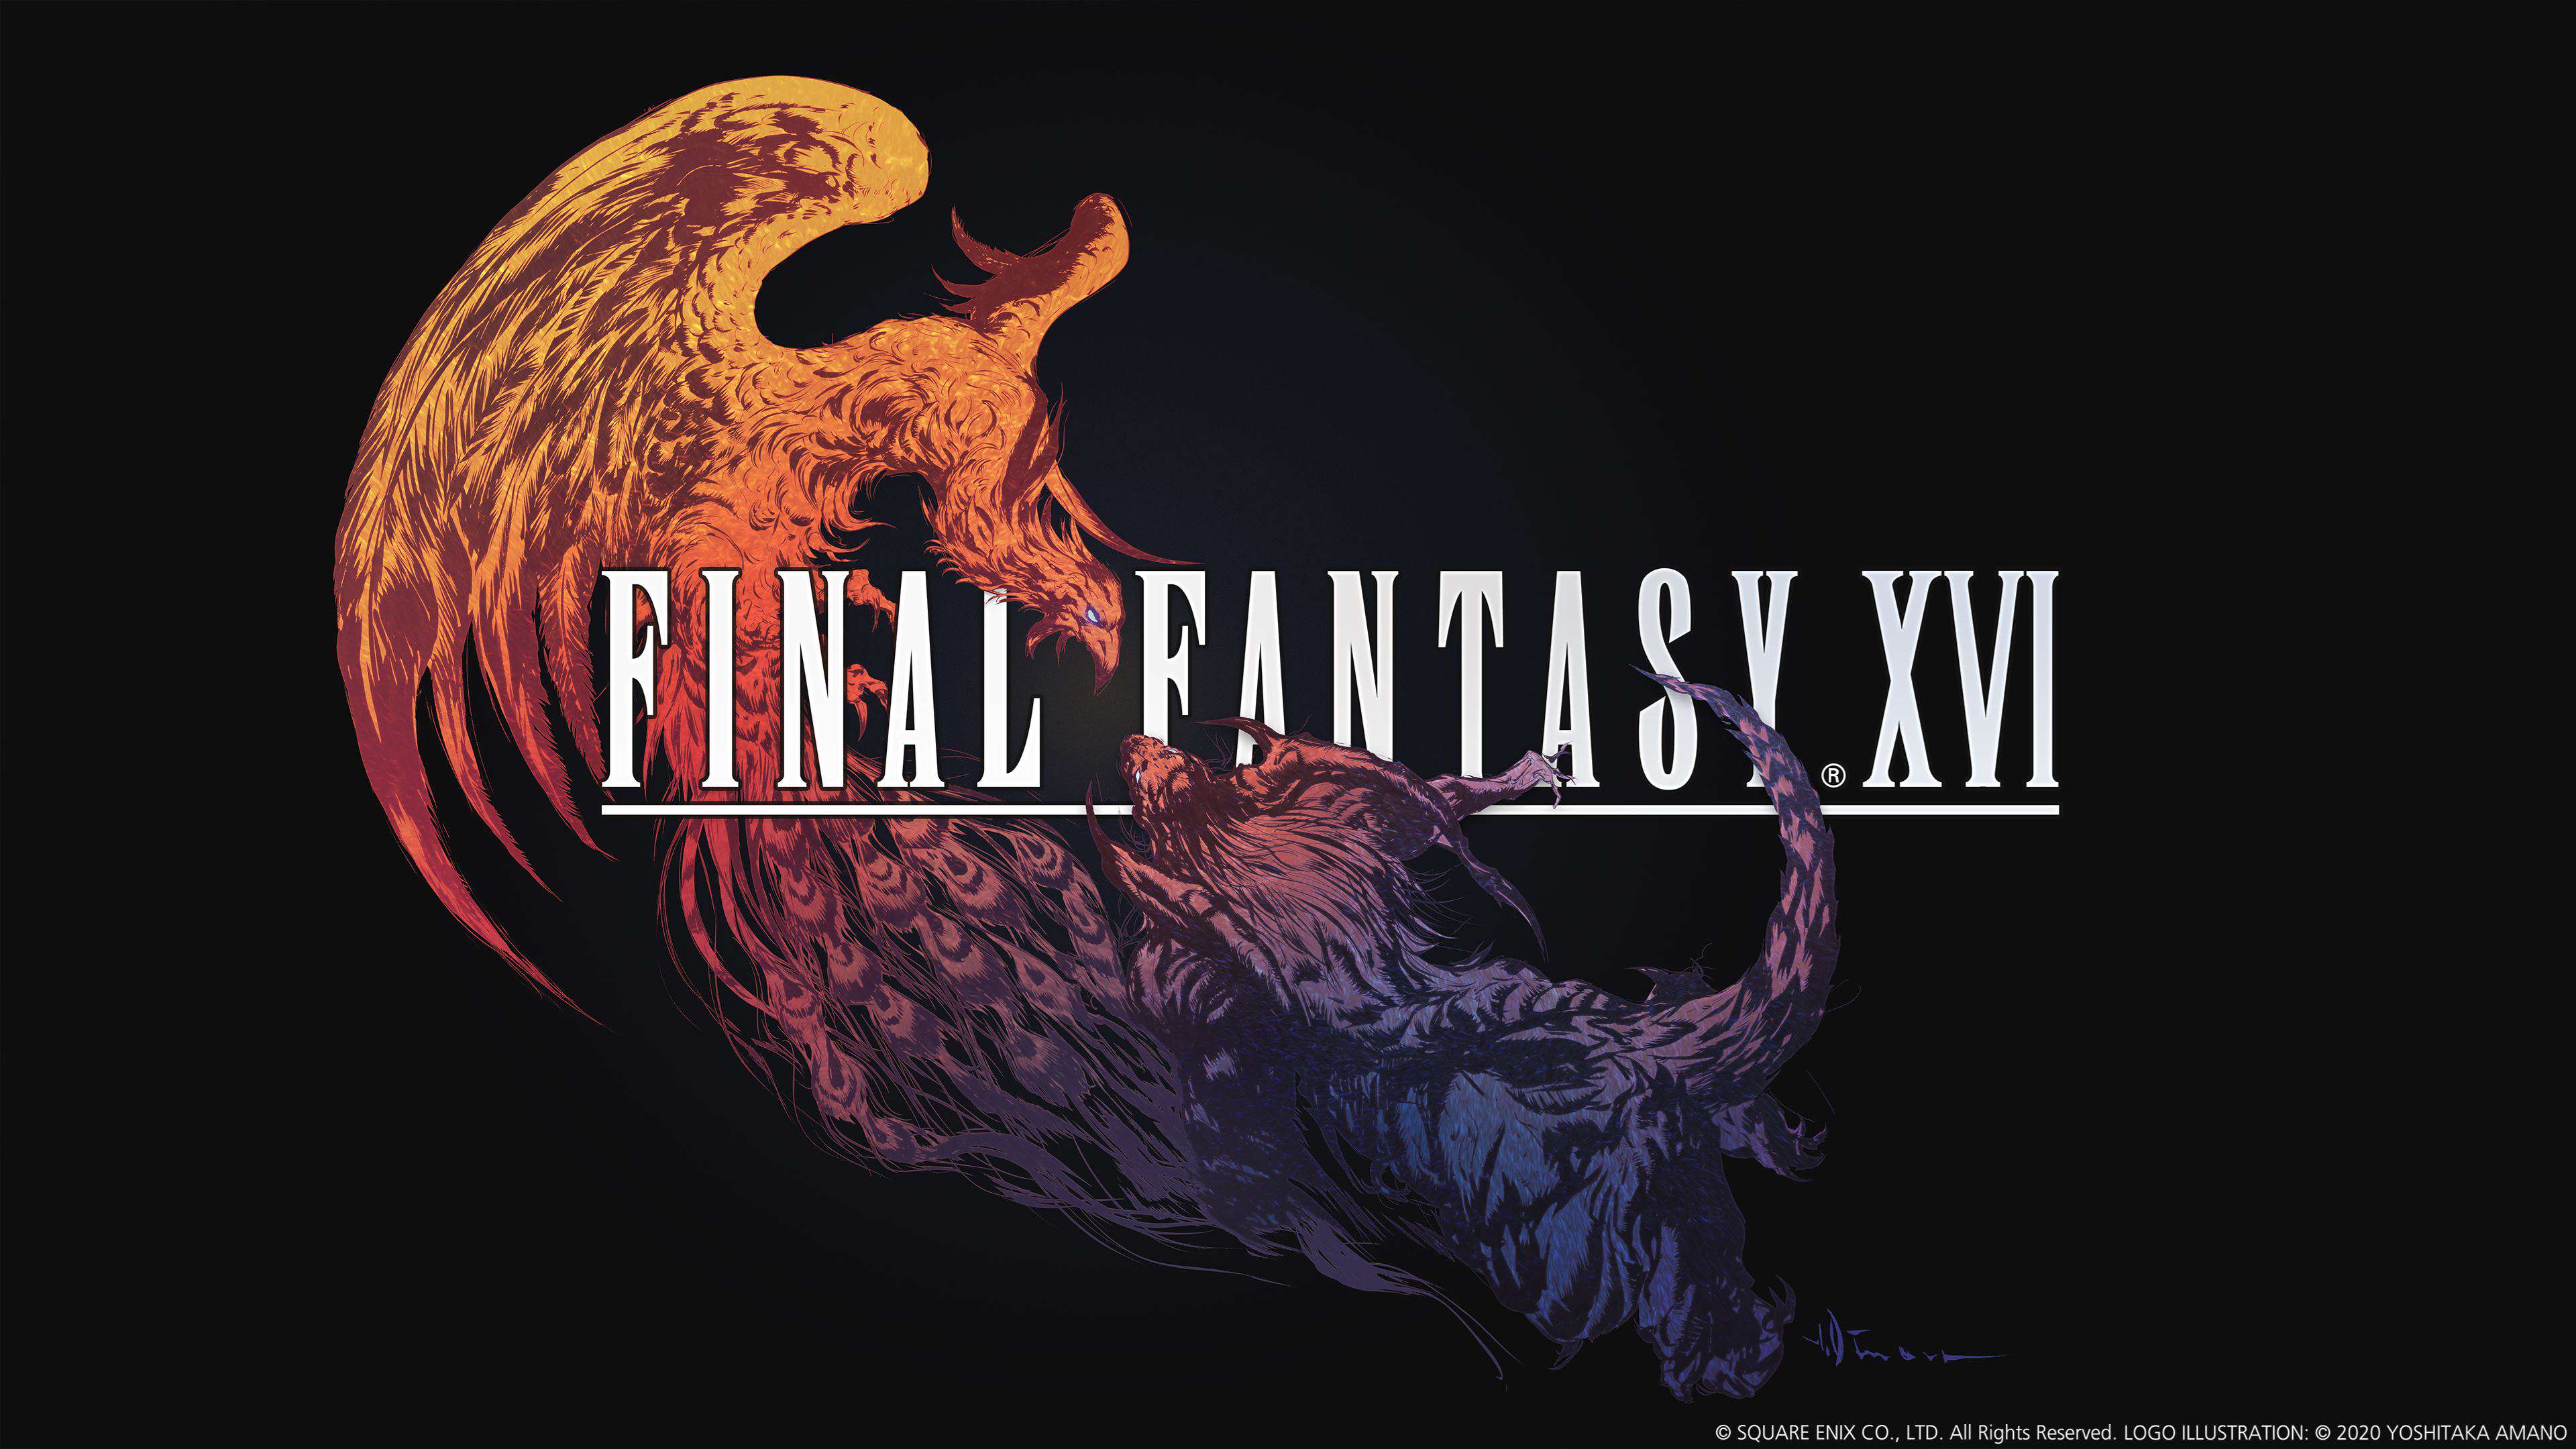 SQUARE ENIX | The Official SQUARE ENIX Website - Tagged